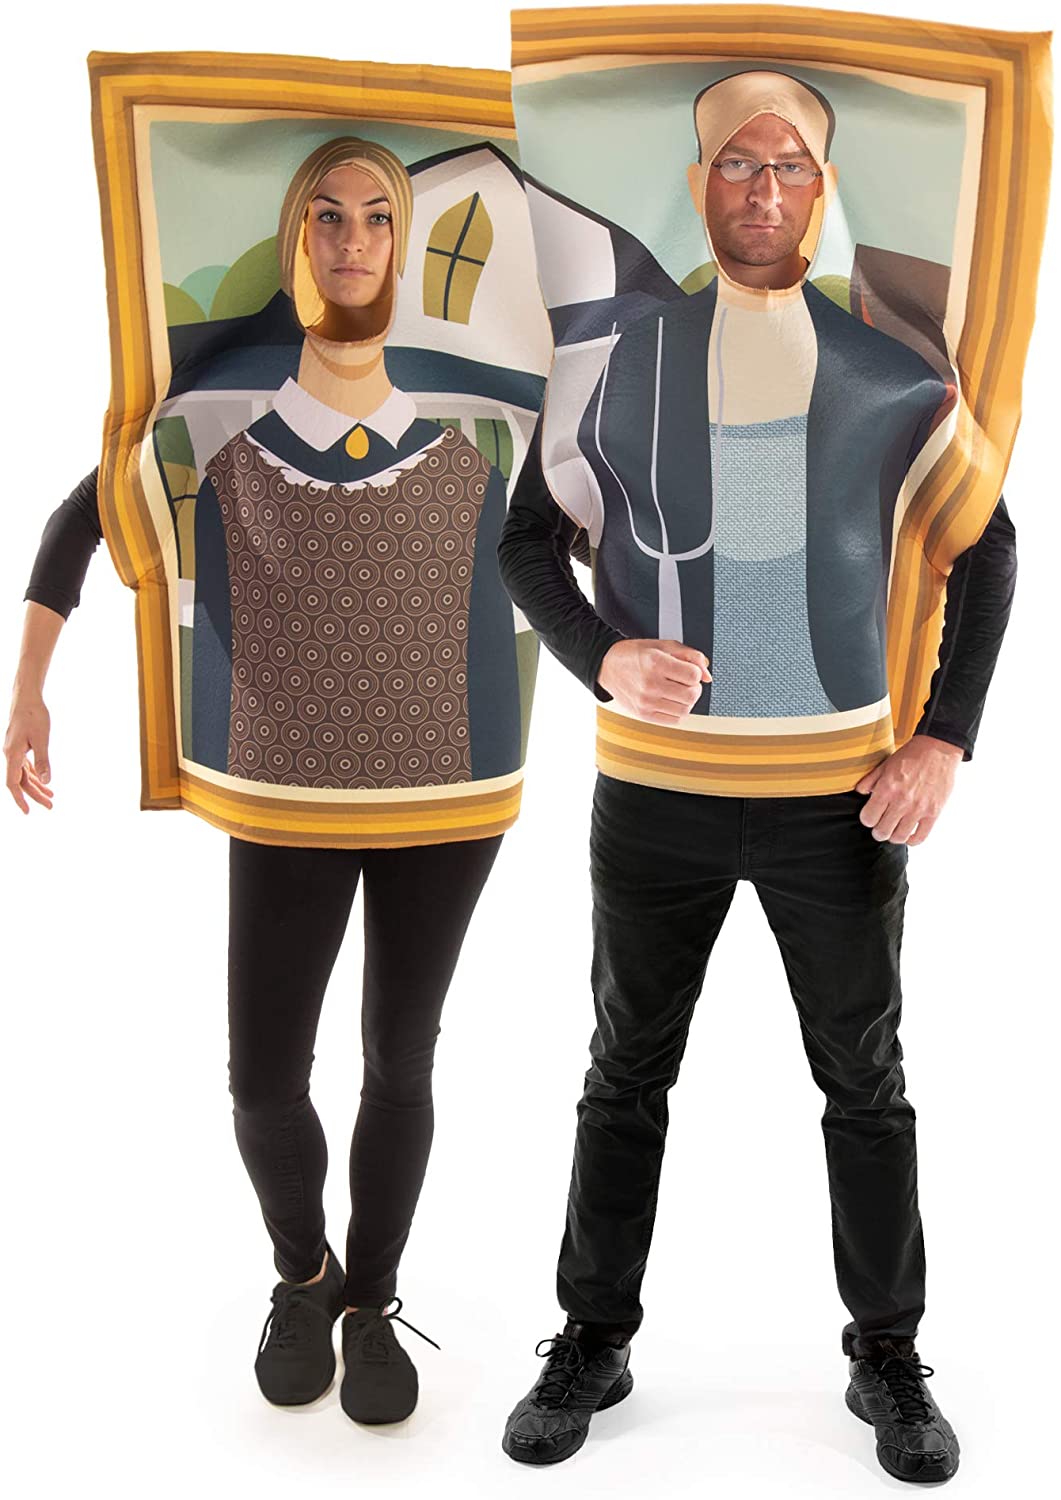 Hauntlook + American Gothic Couples Costume – Funny Famous Frame ...